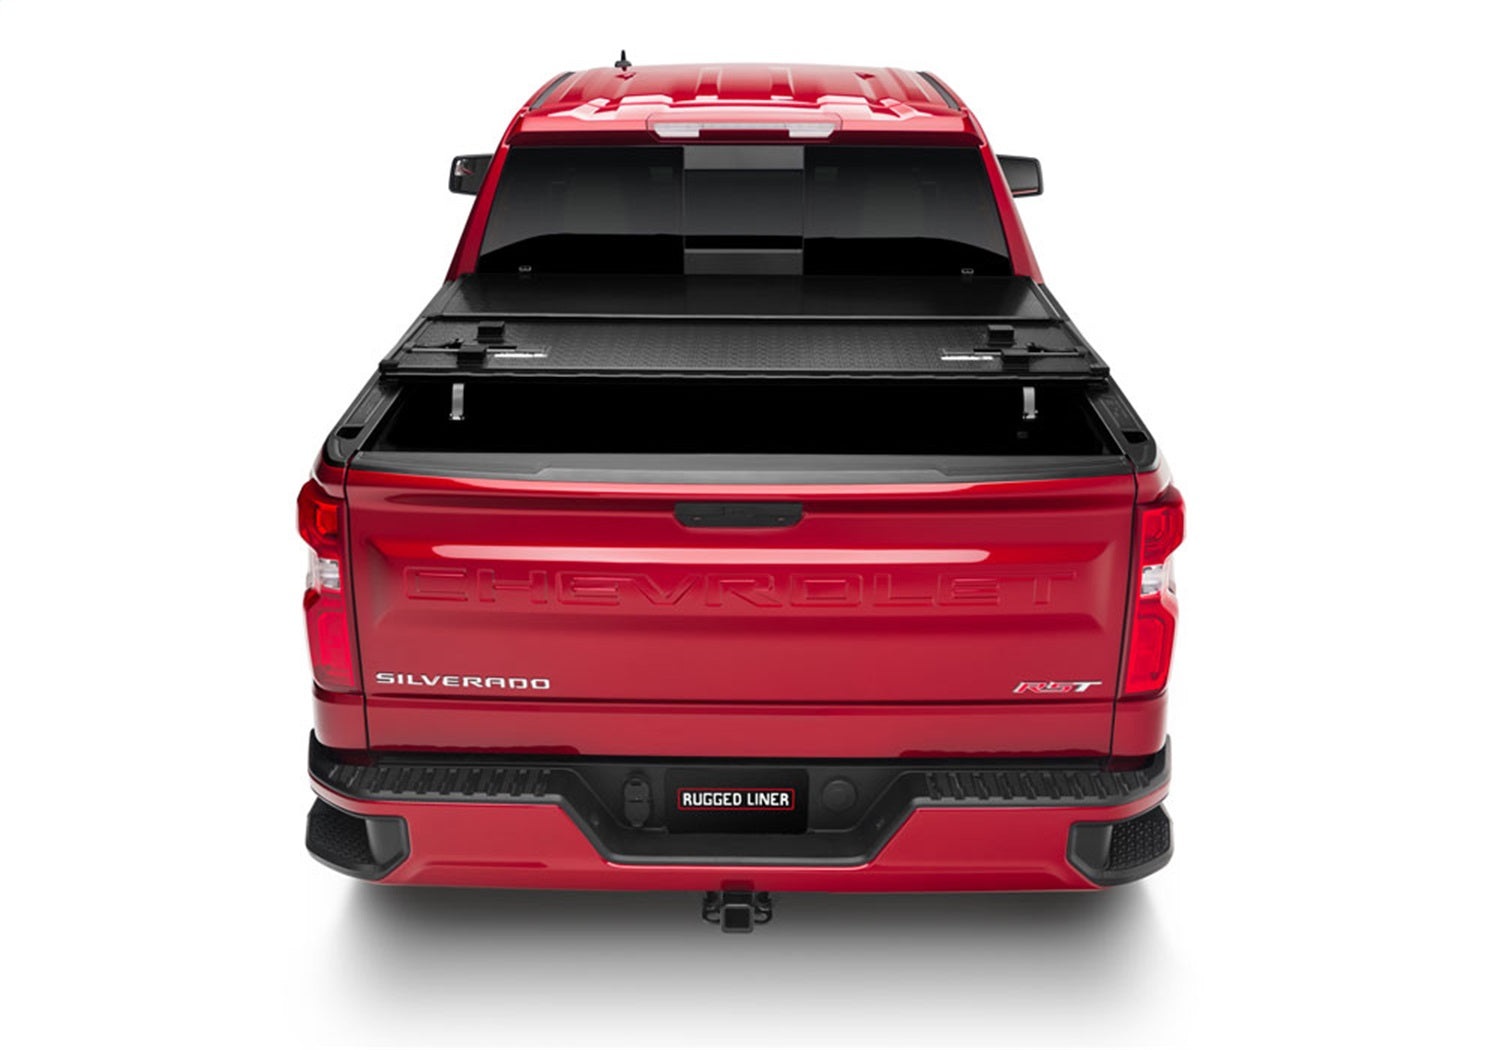 Rugged Liner EH-C807 E-Series Hard Folding Rugged Cover